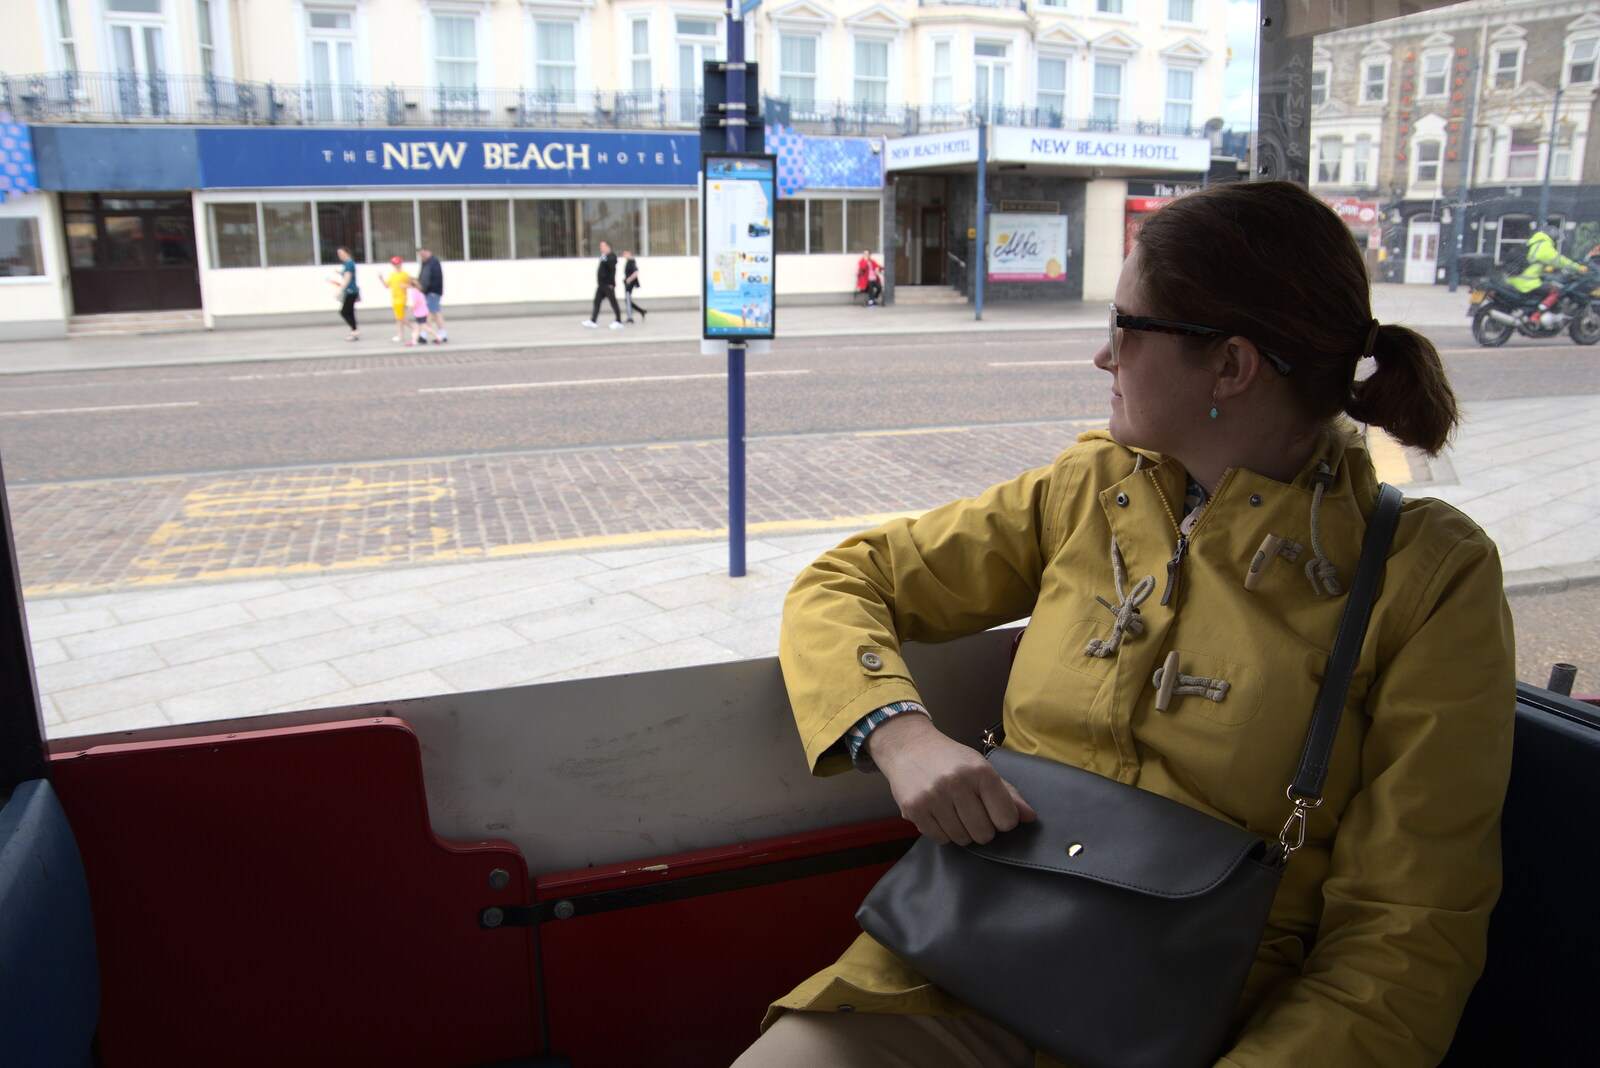 Isobel on the little train from Faded Seaside Glamour: A Weekend in Great Yarmouth, Norfolk - 29th May 2022